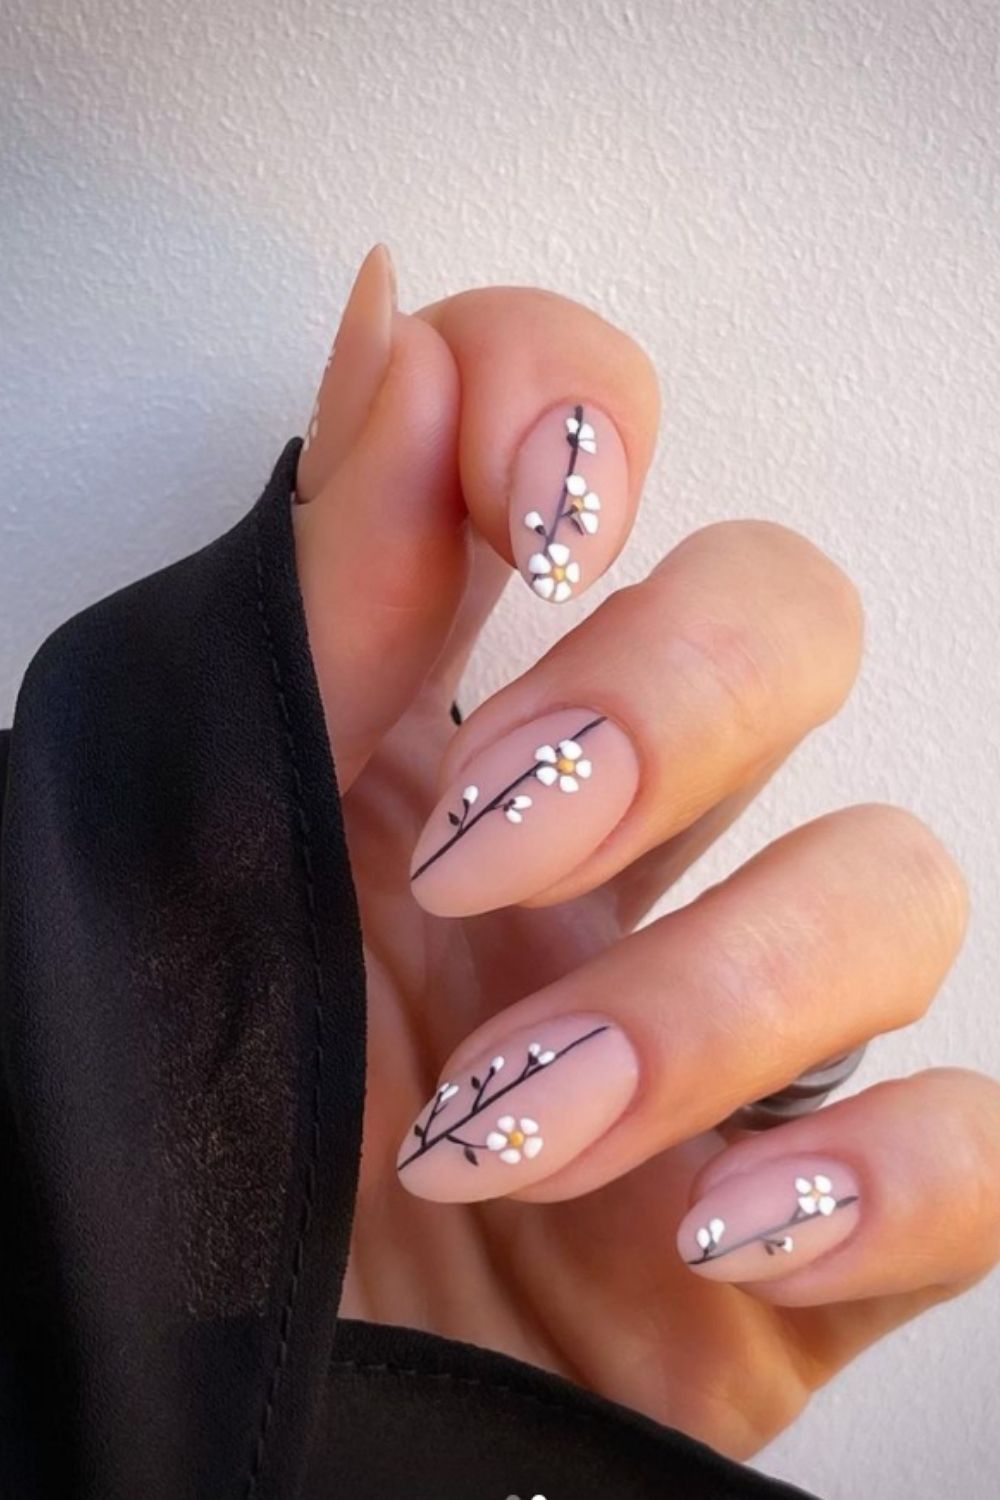 Nail Designs With Almond Shape Daily Nail Art And Design